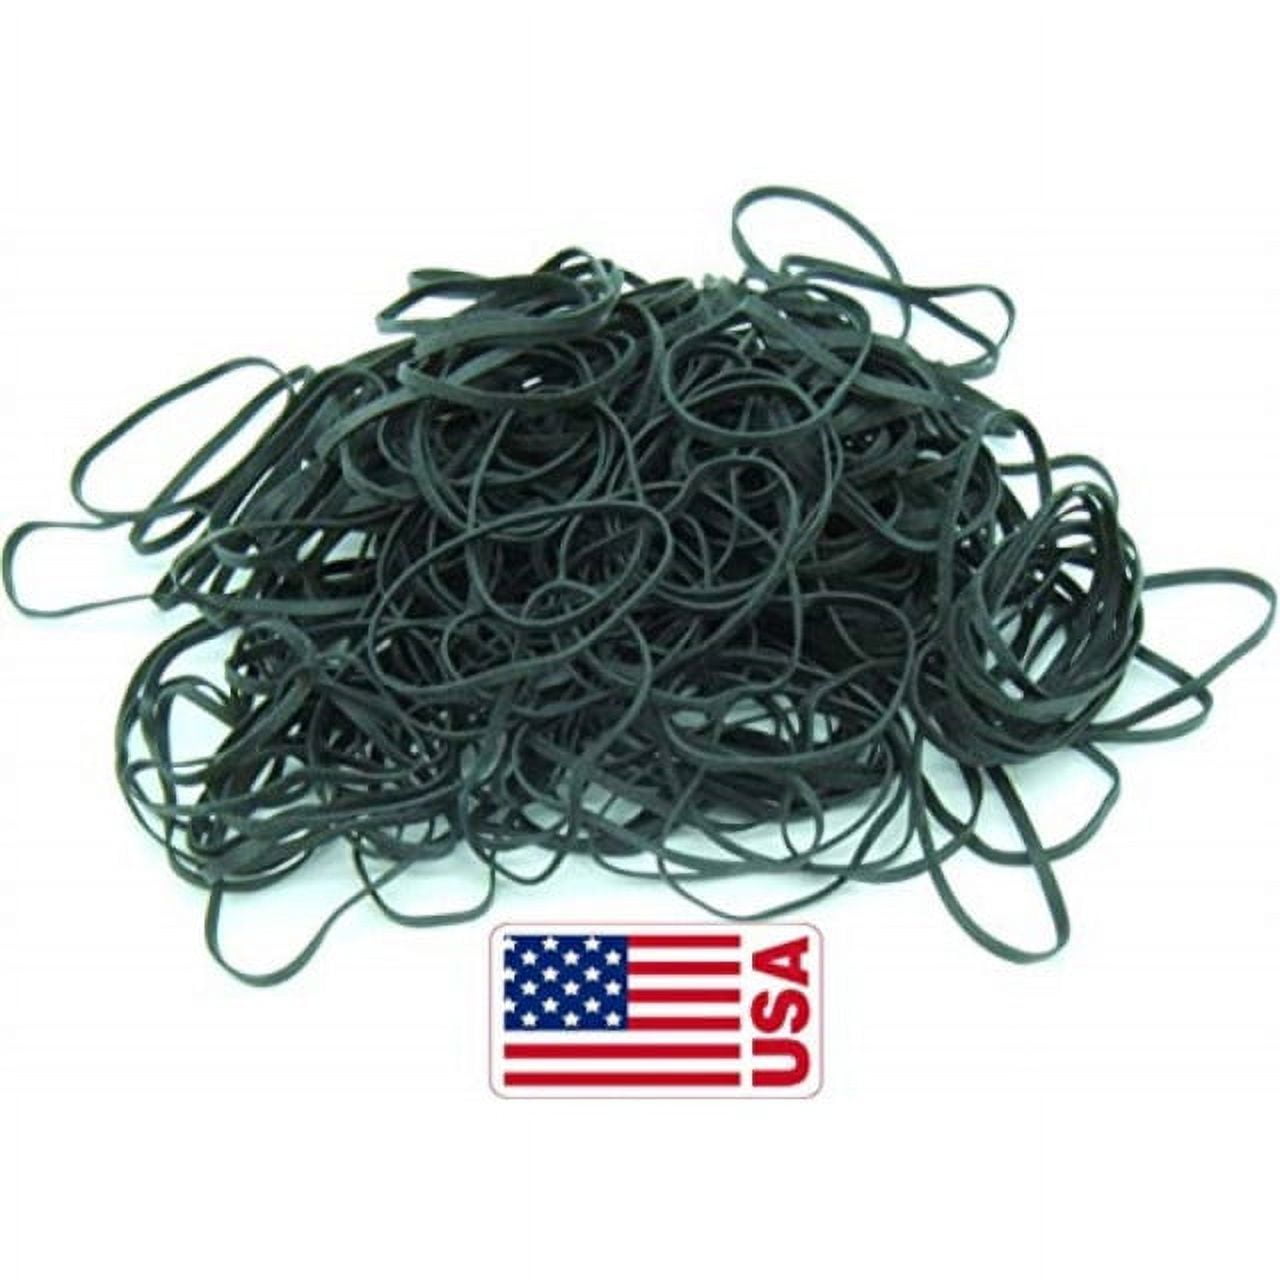 15 x Large Strong Thick 6 x 1/2 Rubber Elastic Bands No.89 152.4